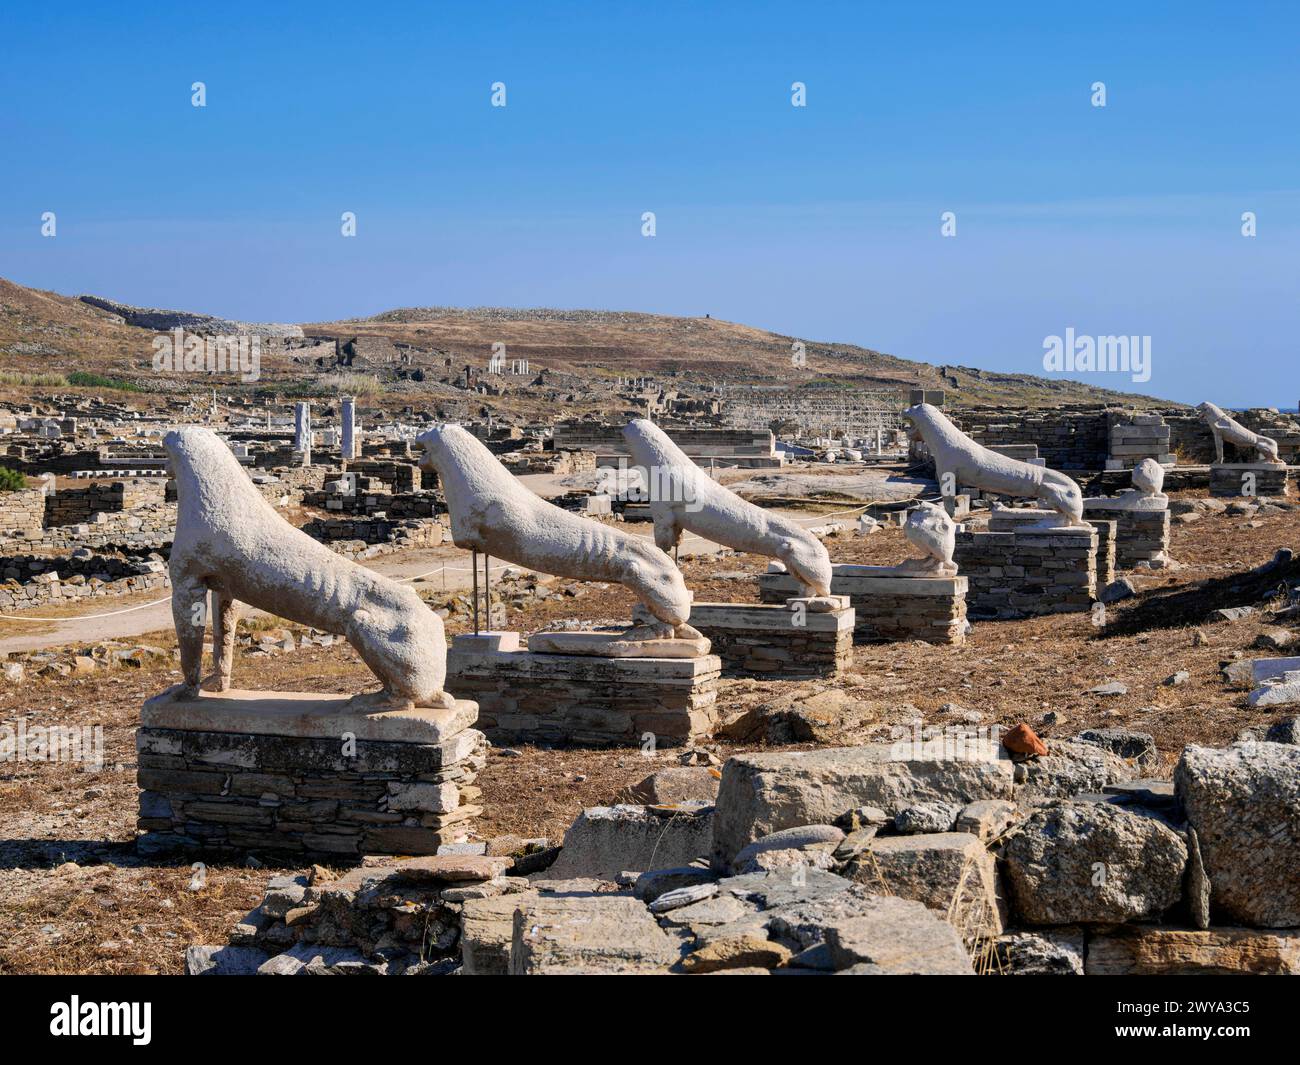 The Terrace of the Lions, Delos Archaeological Site, UNESCO World Heritage Site, Delos Island, Cyclades, Greek Islands, Greece, Europe Copyright: Karo Stock Photo